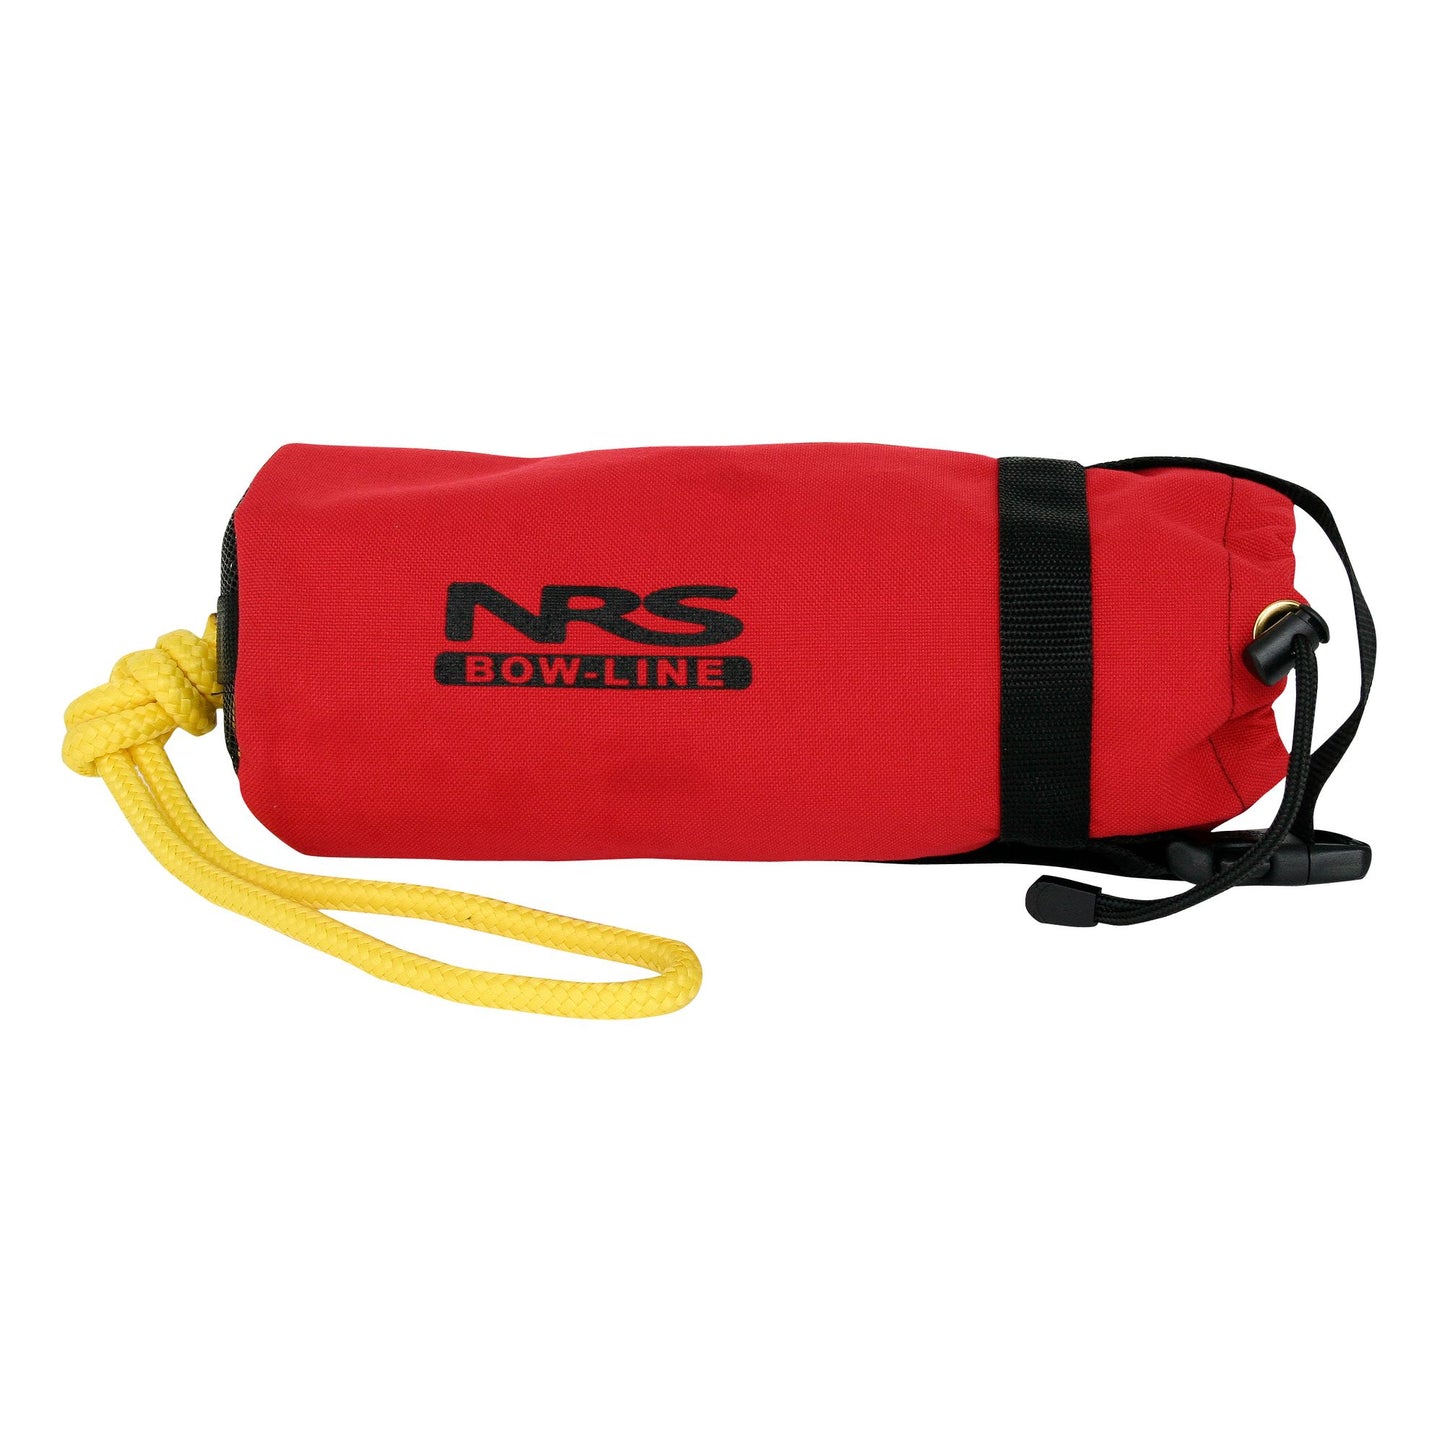 NRS Bow Line Bags